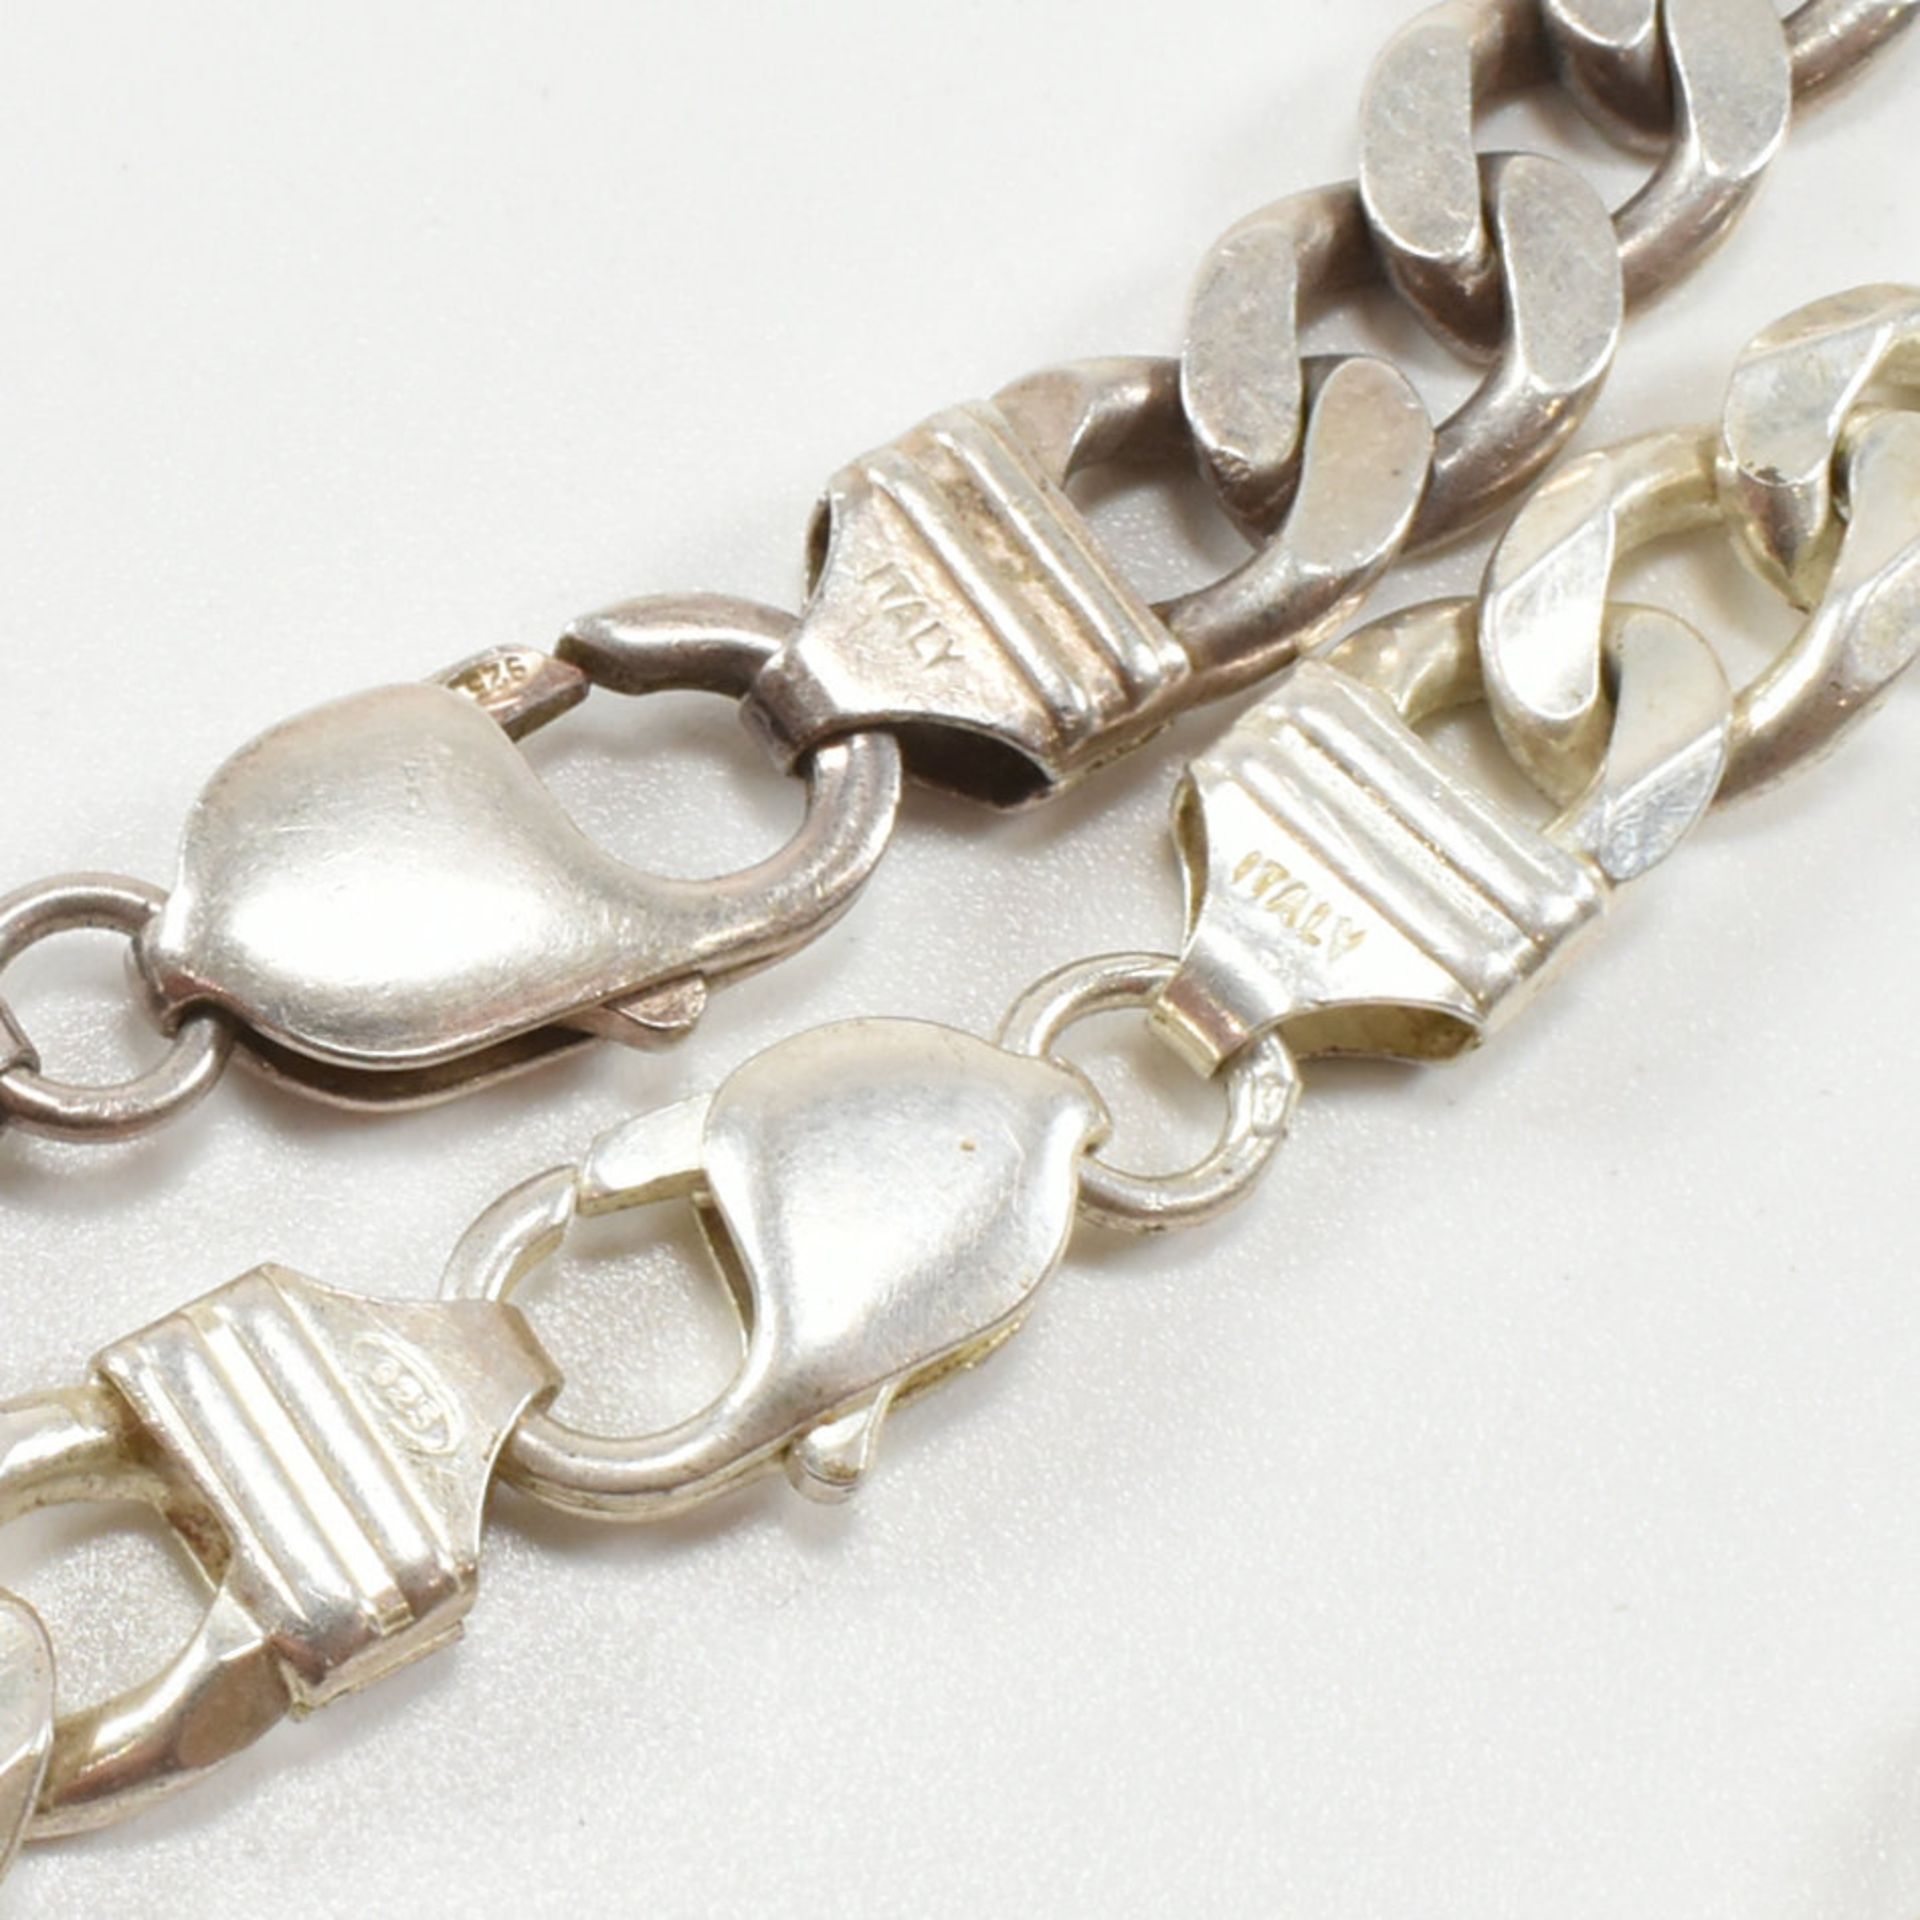 CONTEMPORARY ITALIAN 925 SILVER CURB LINK CHAIN & BRACELET - Image 5 of 7